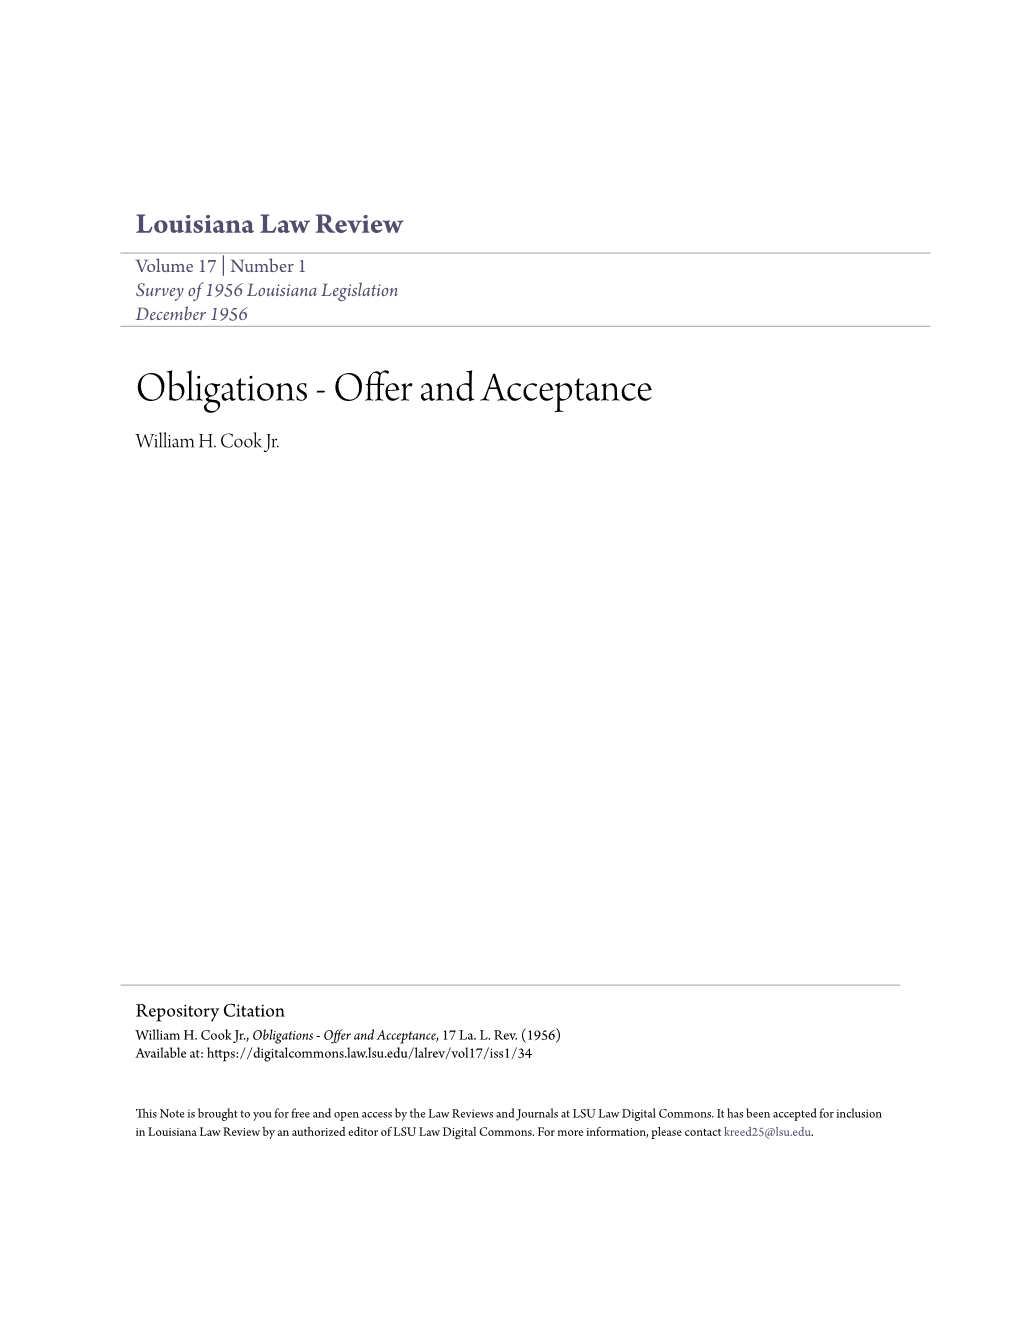 Obligations - Offer and Acceptance William H